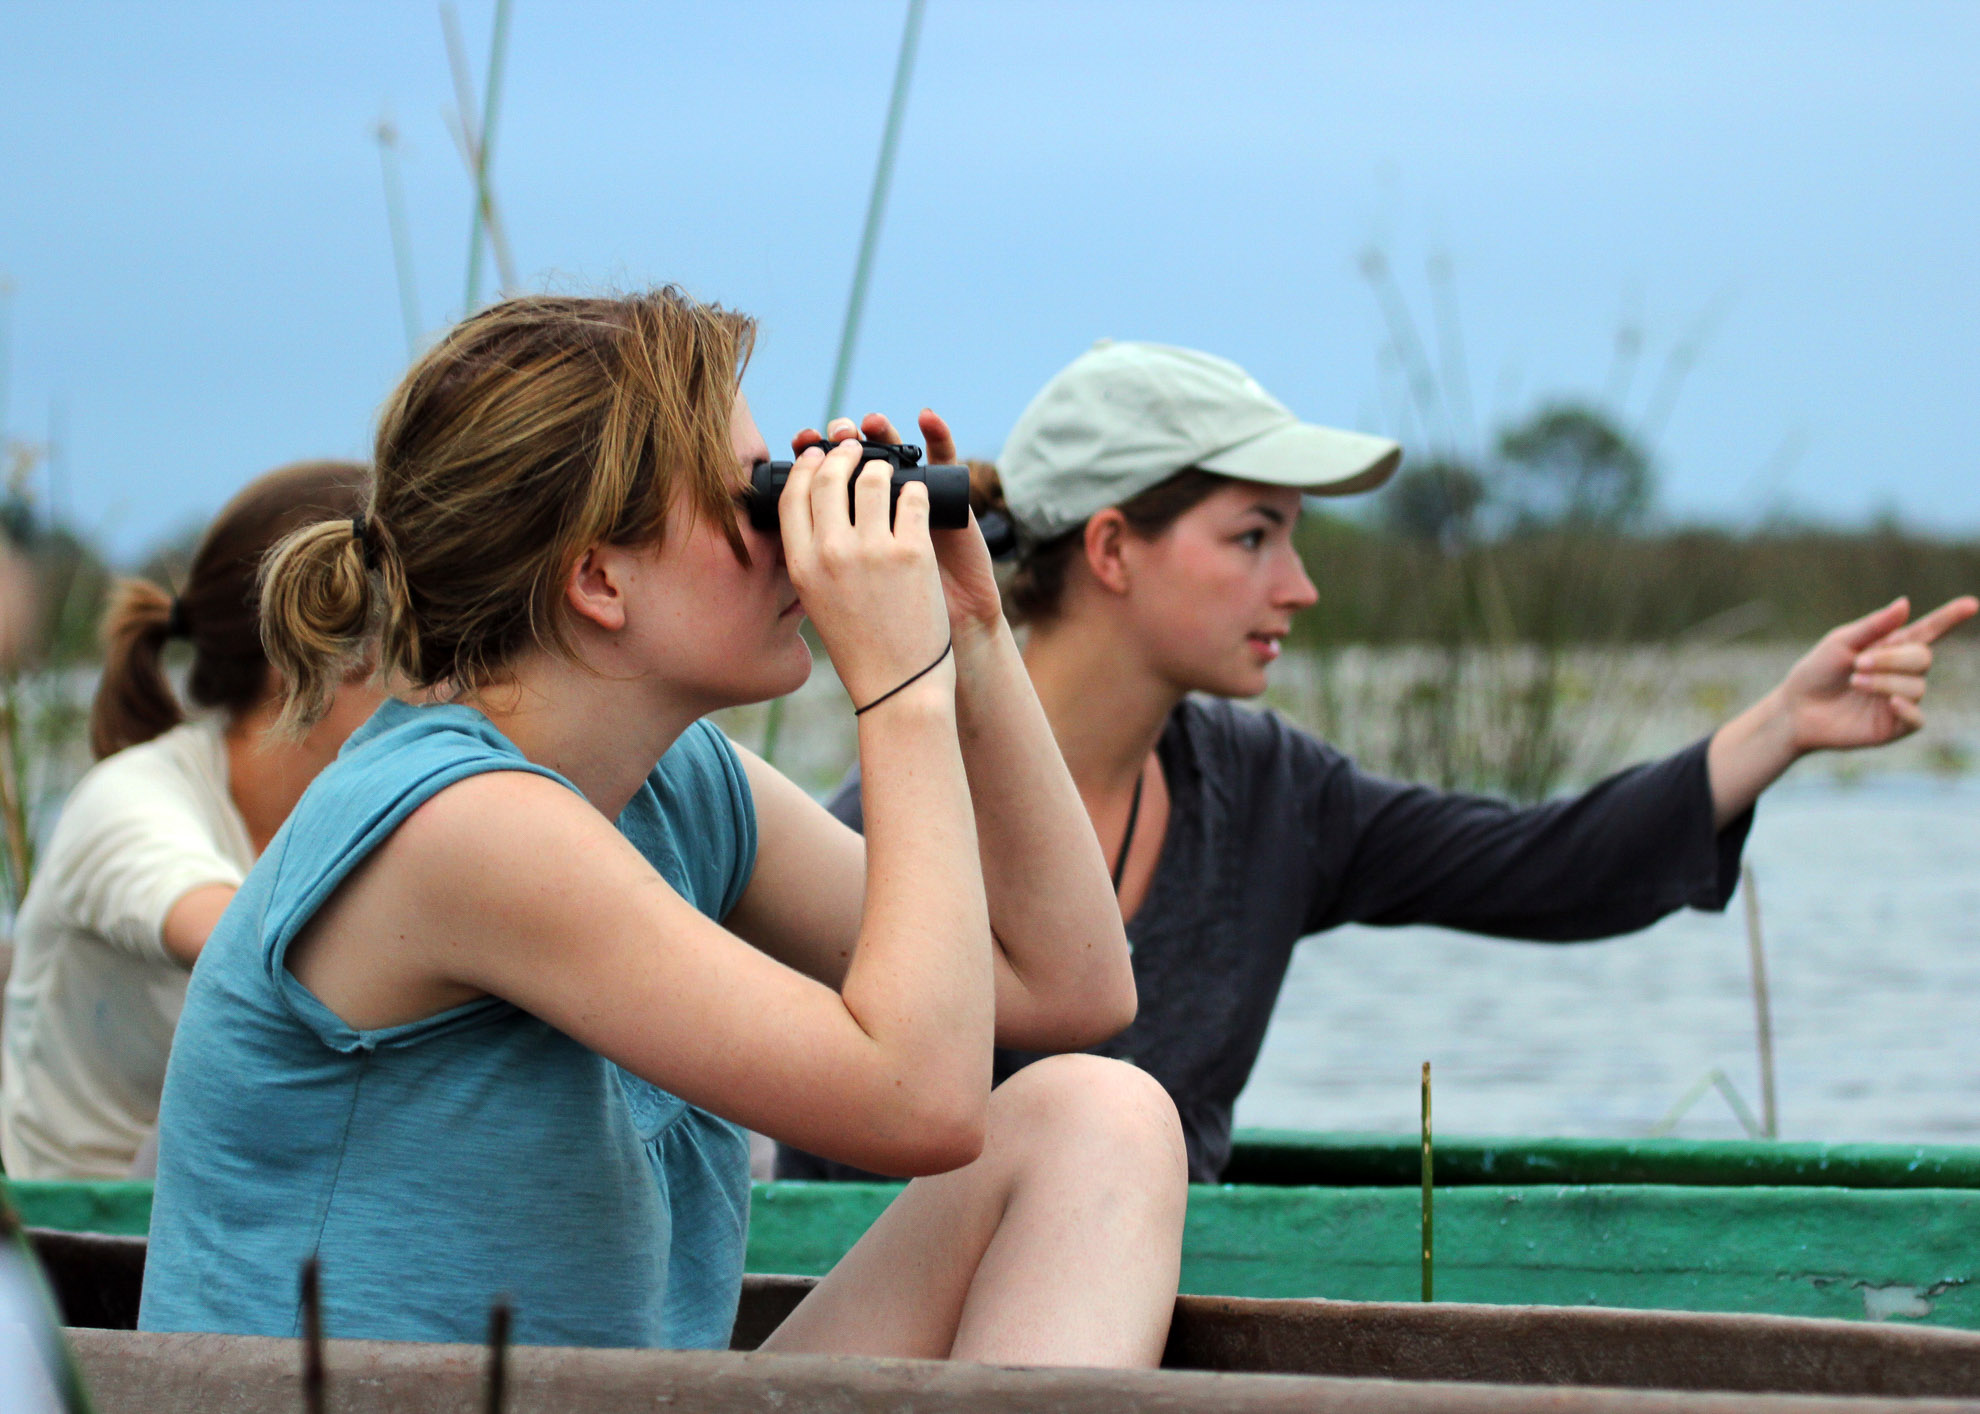 Maun, Botswana - March 27, 2012: Tourists in mokoros watch a group of hippos in the Okavango River.